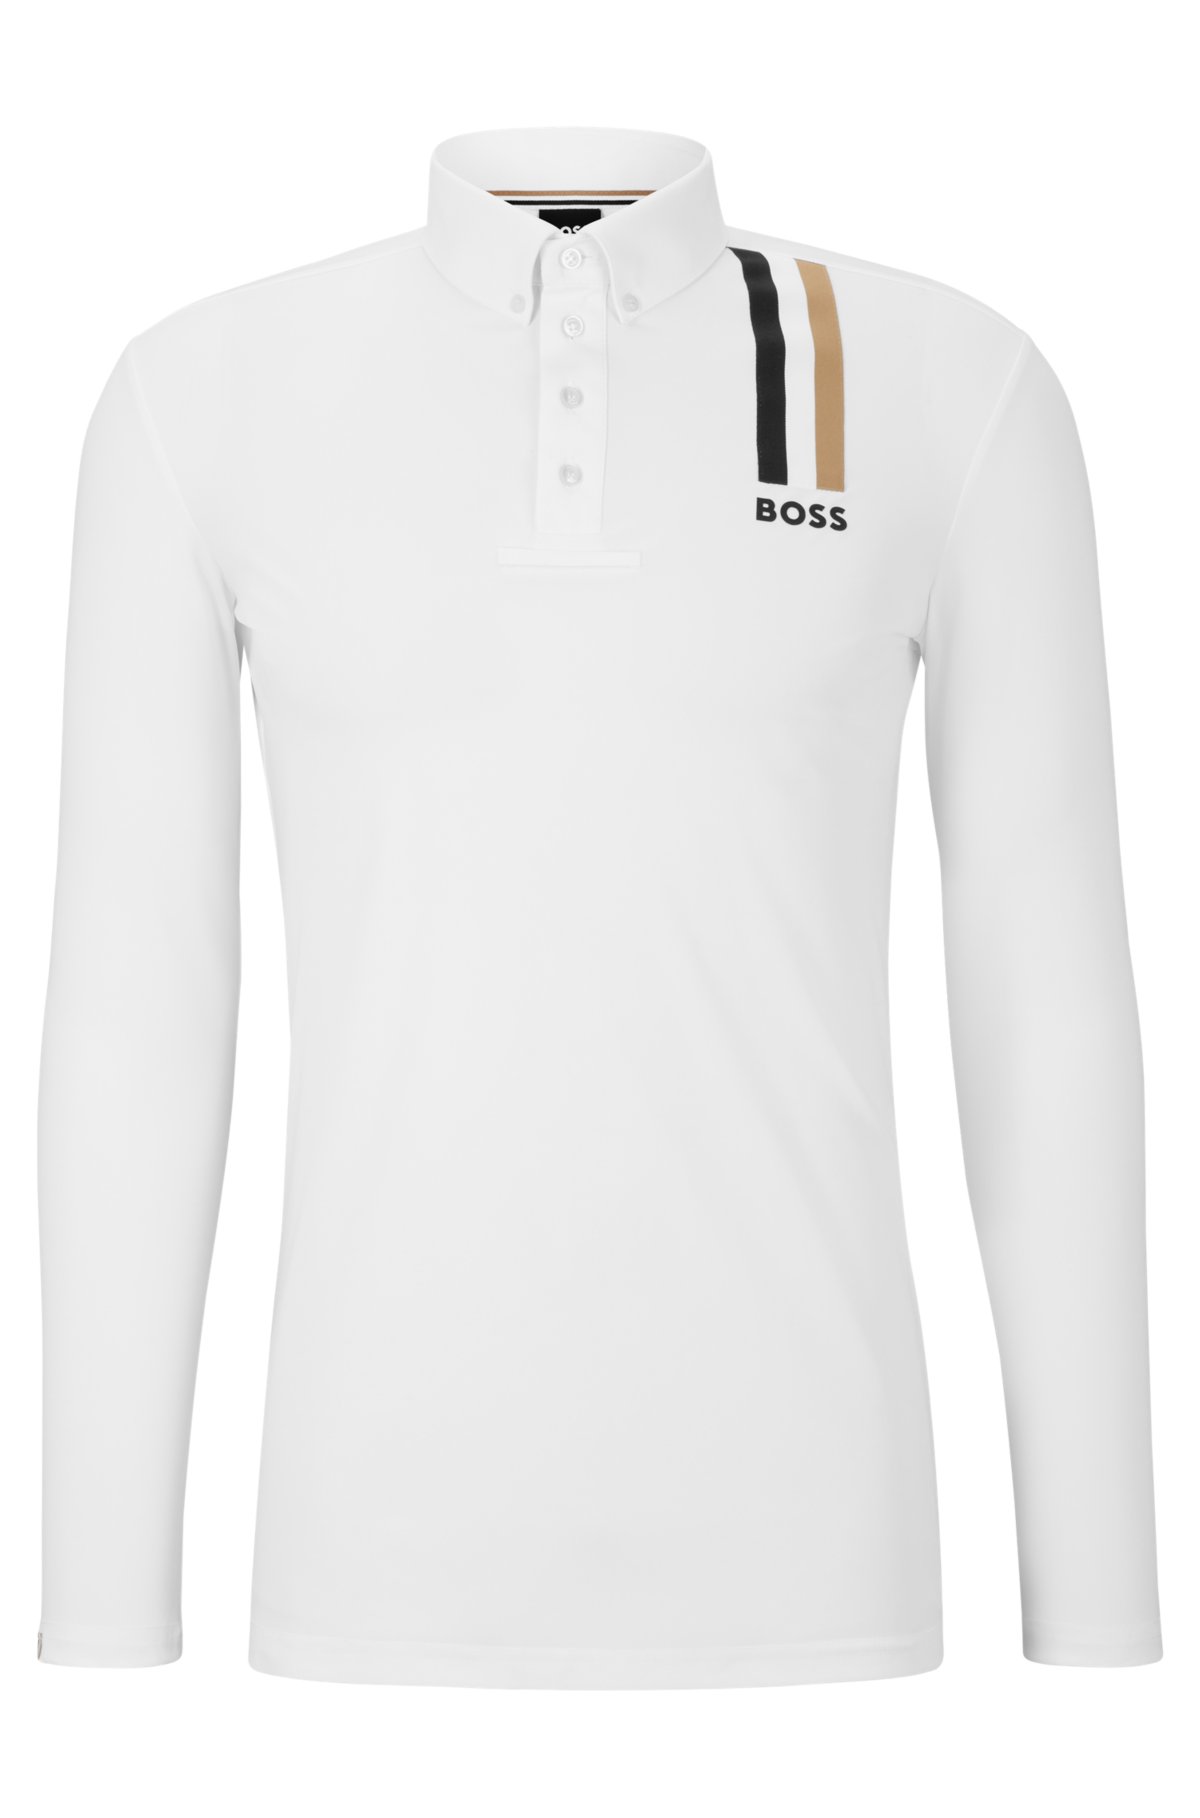 BOSS - Equestrian show shirt with signature stripe and logo